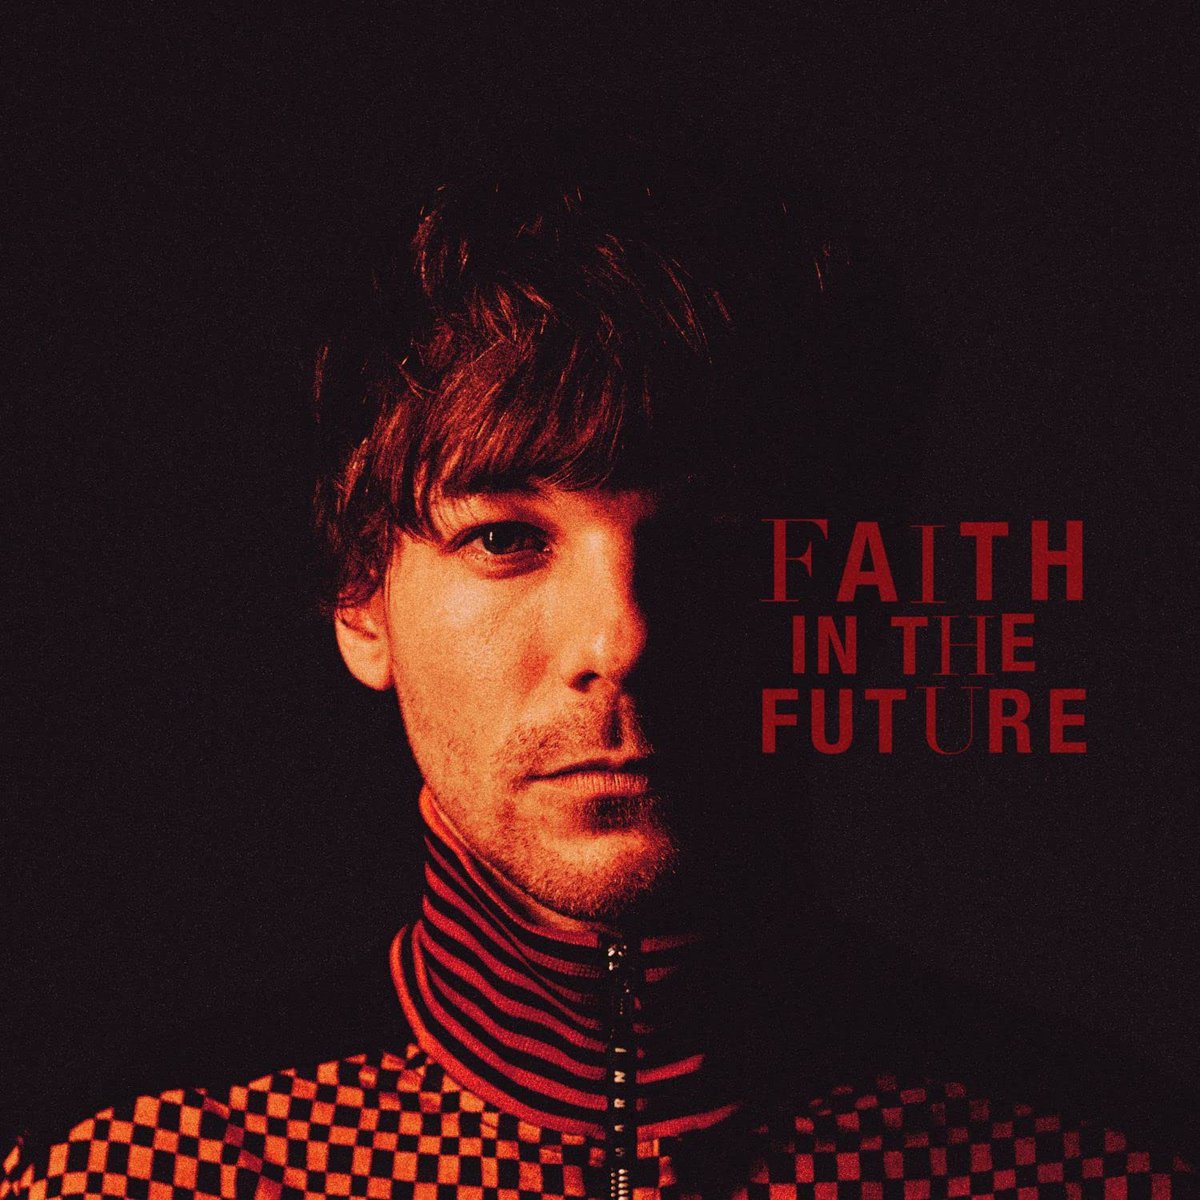 .@Louis_Tomlinson's 'Faith In the Future' is now certified Silver in the UK.